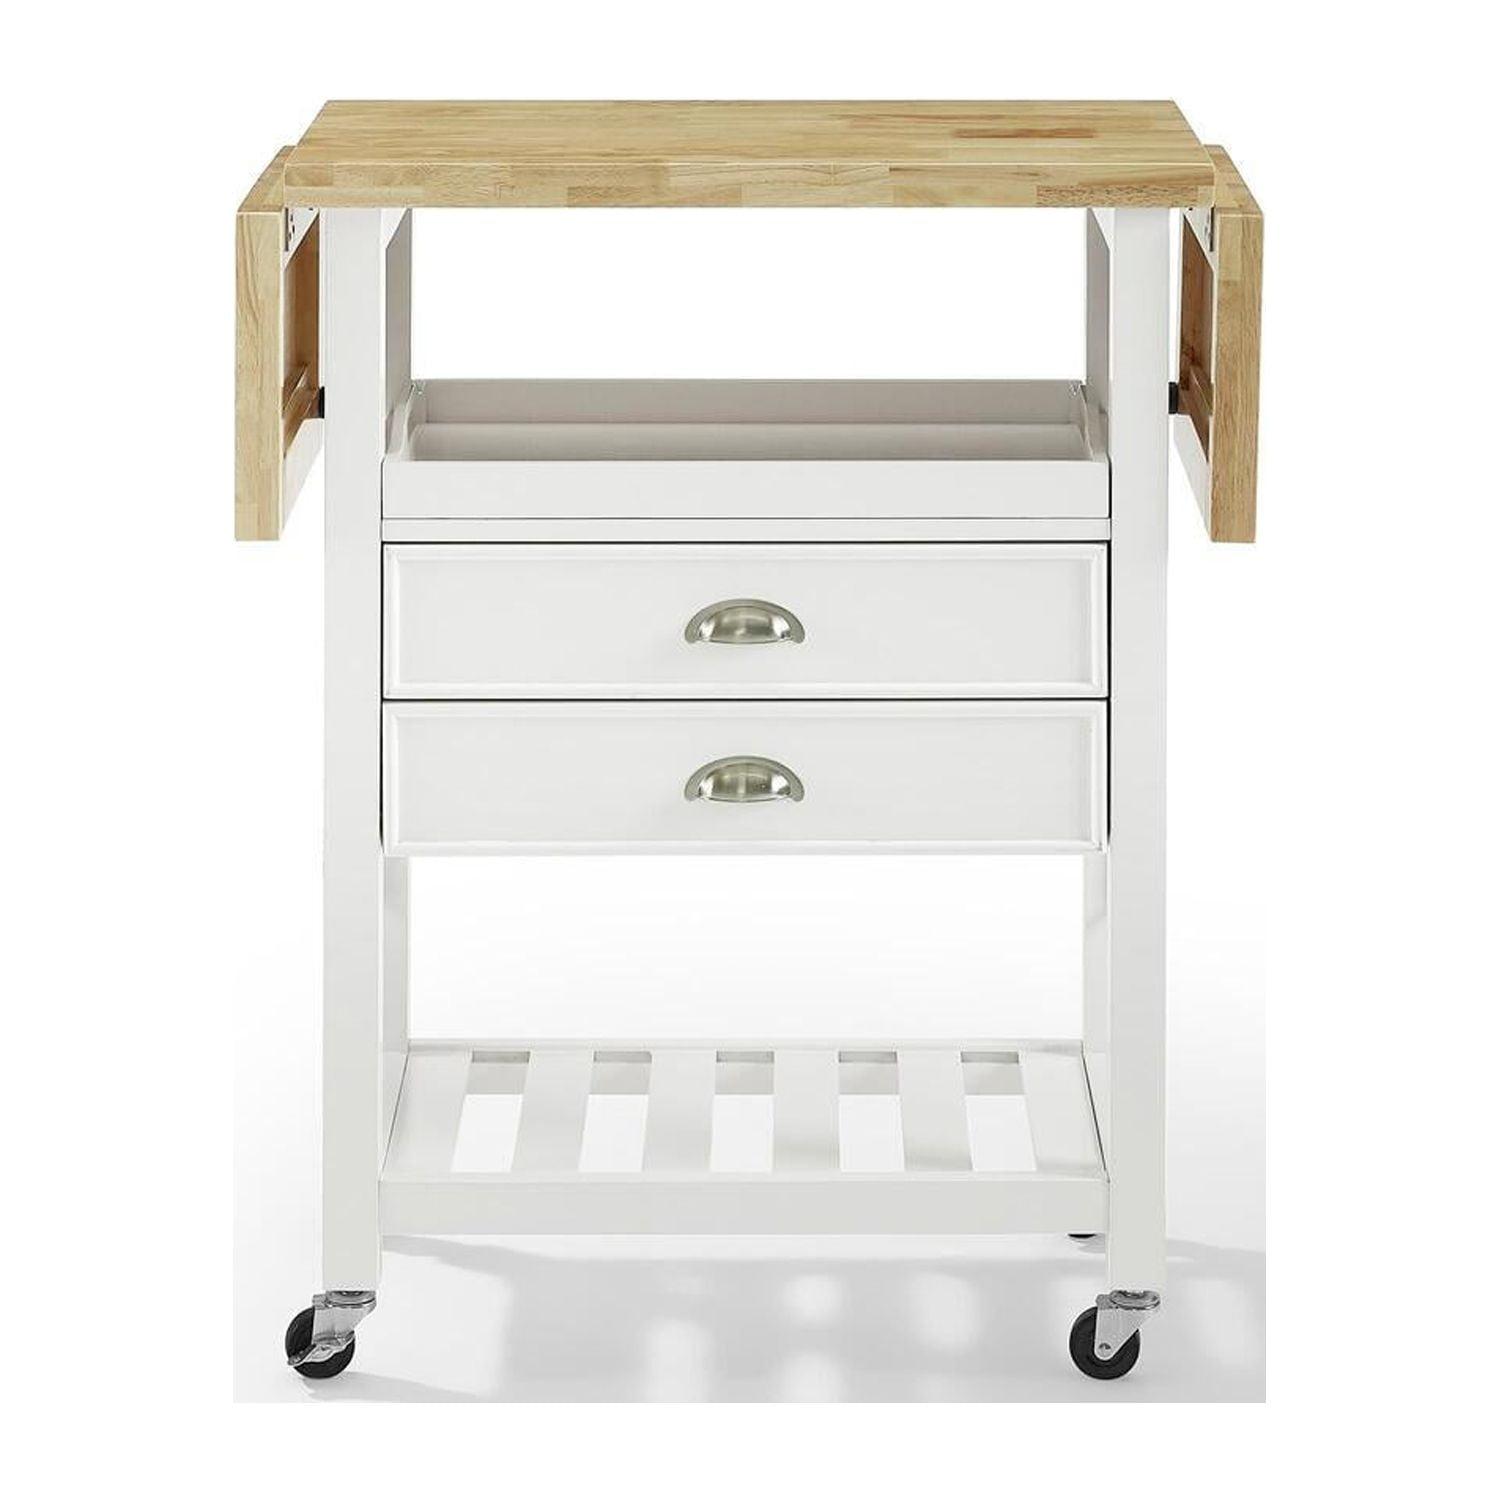 Coastal White Rubberwood Drop-Leaf Kitchen Cart with Nickel Accents